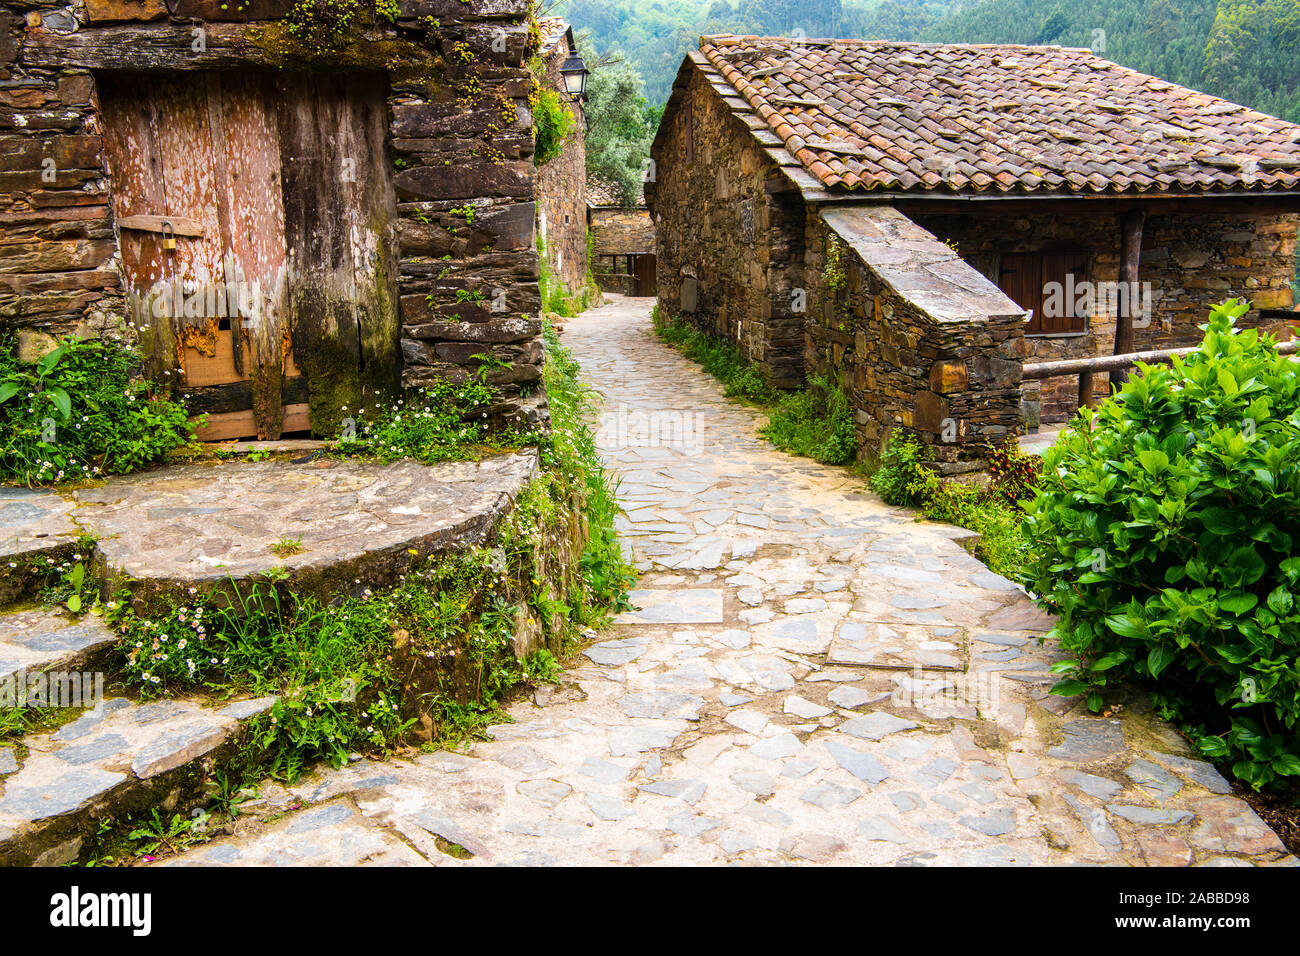 Stone paved pathway winds through rustic buildings overgrown with greenery and wildflowers in Talasnal, Portugal Stock Photo